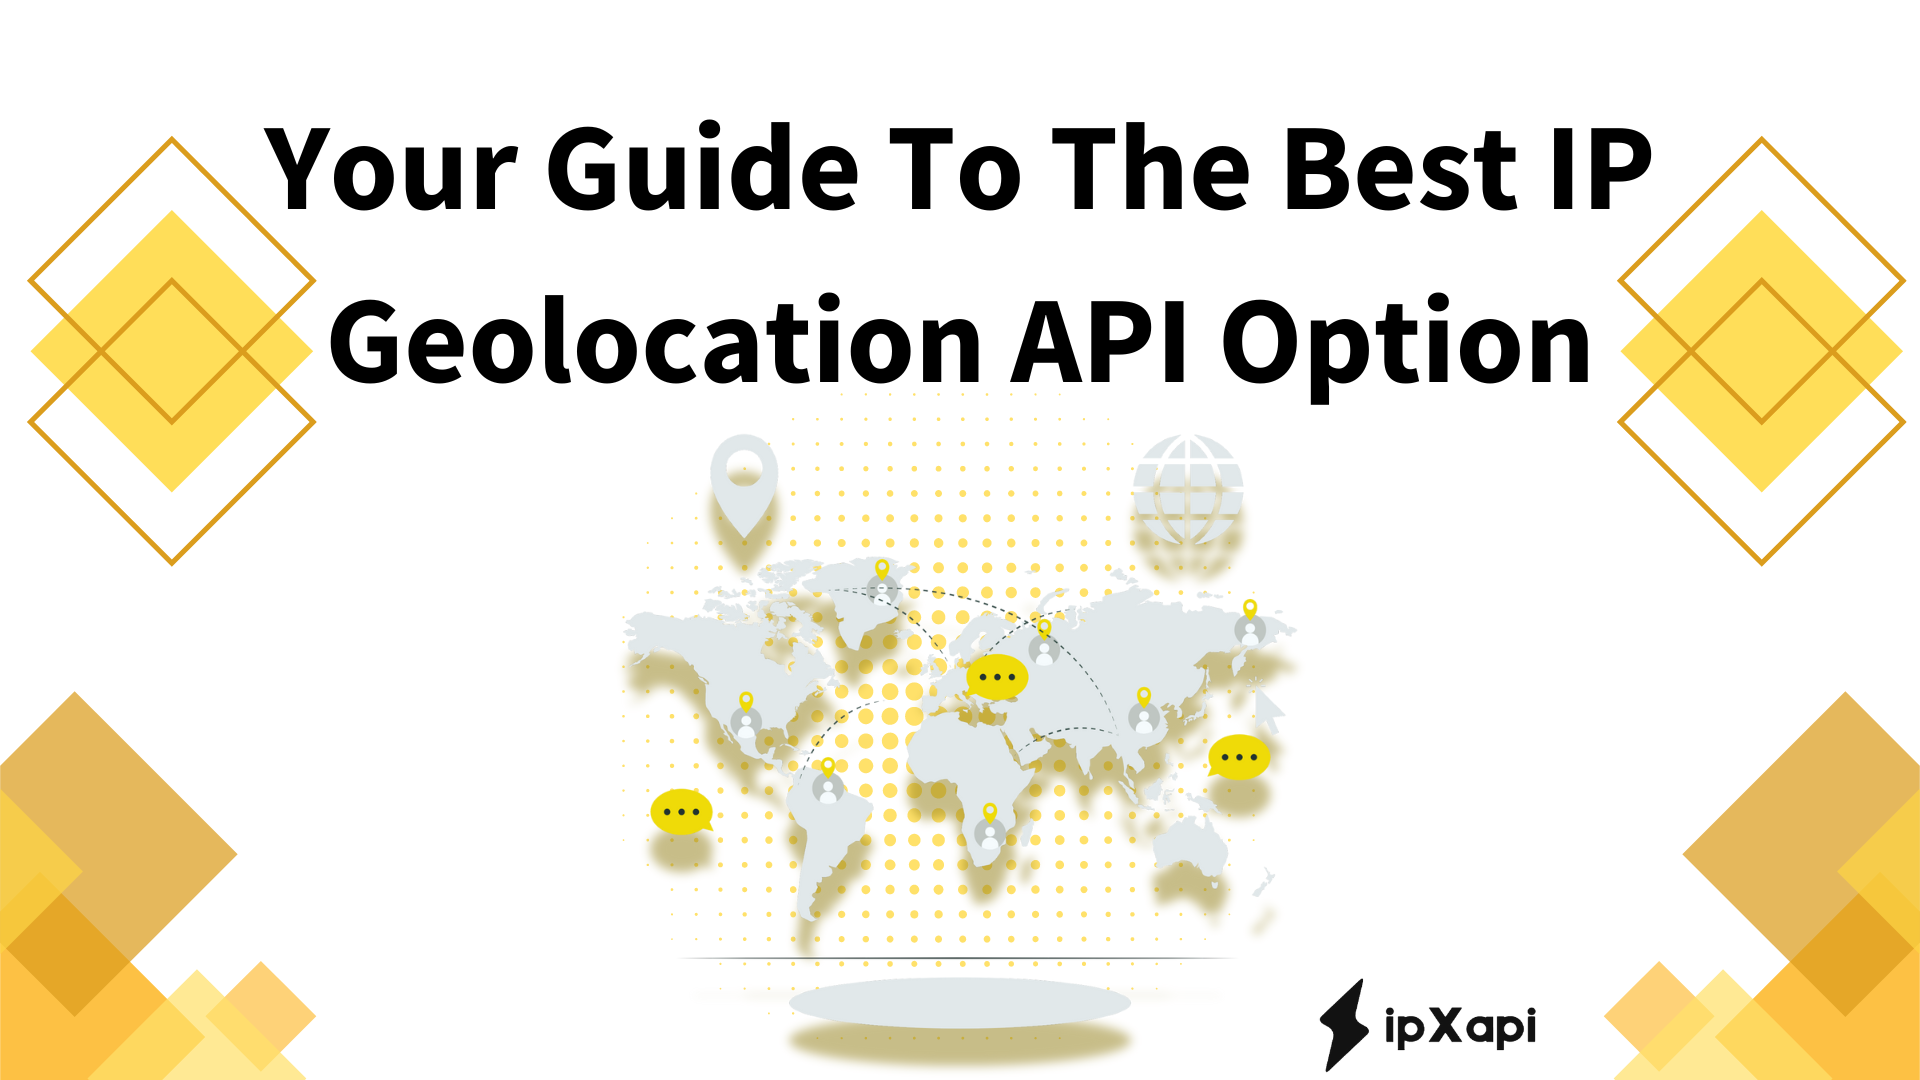 Your Guide To The Best IP Geolocation API Option